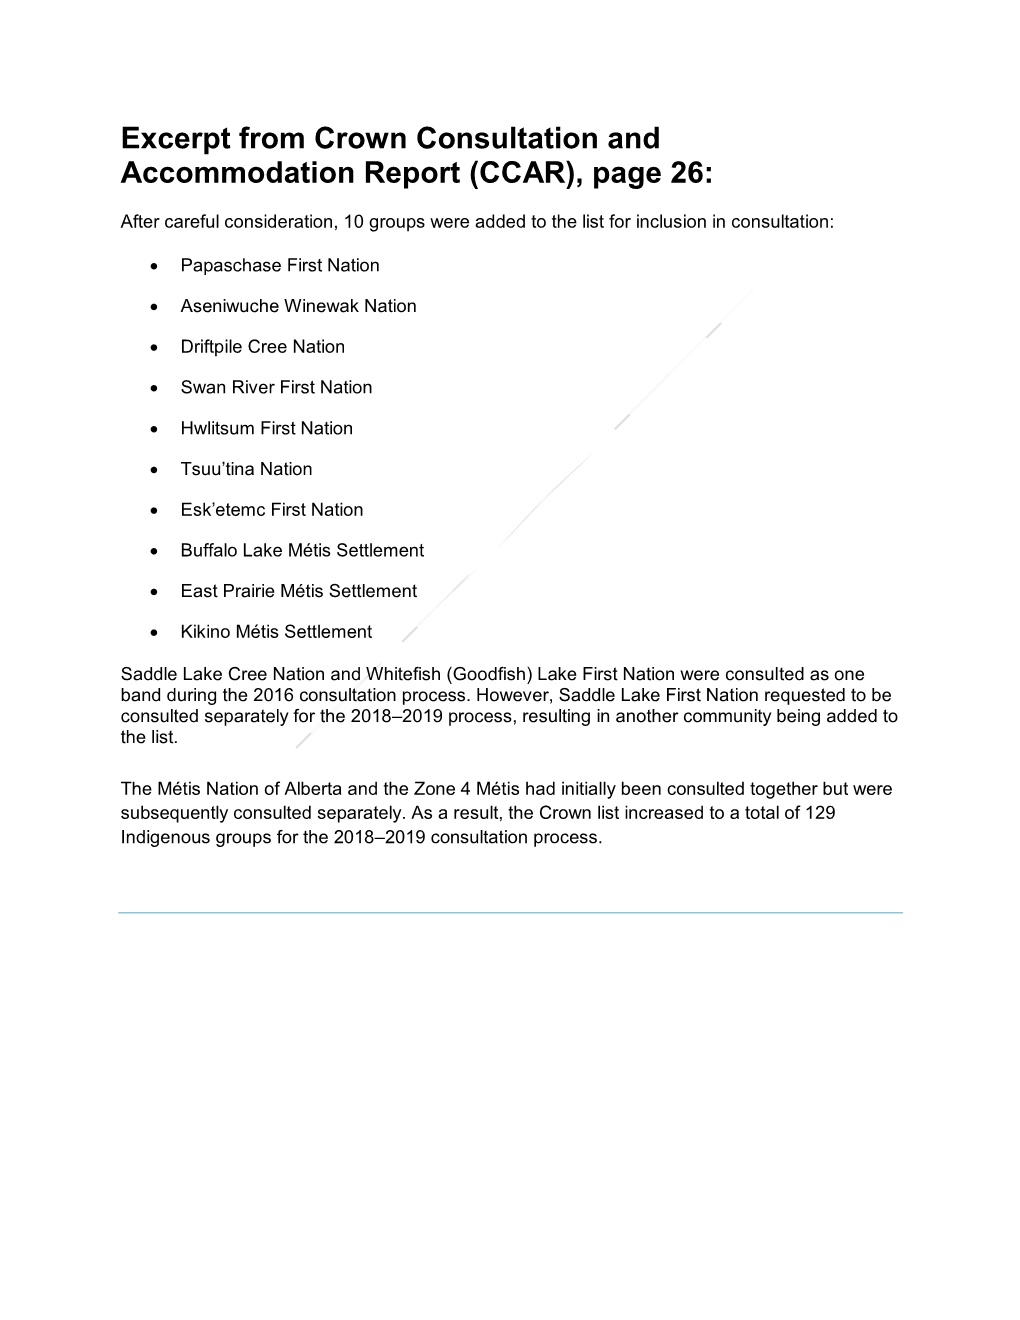 Excerpt from Crown Consultation and Accommodation Report (CCAR), Page 26